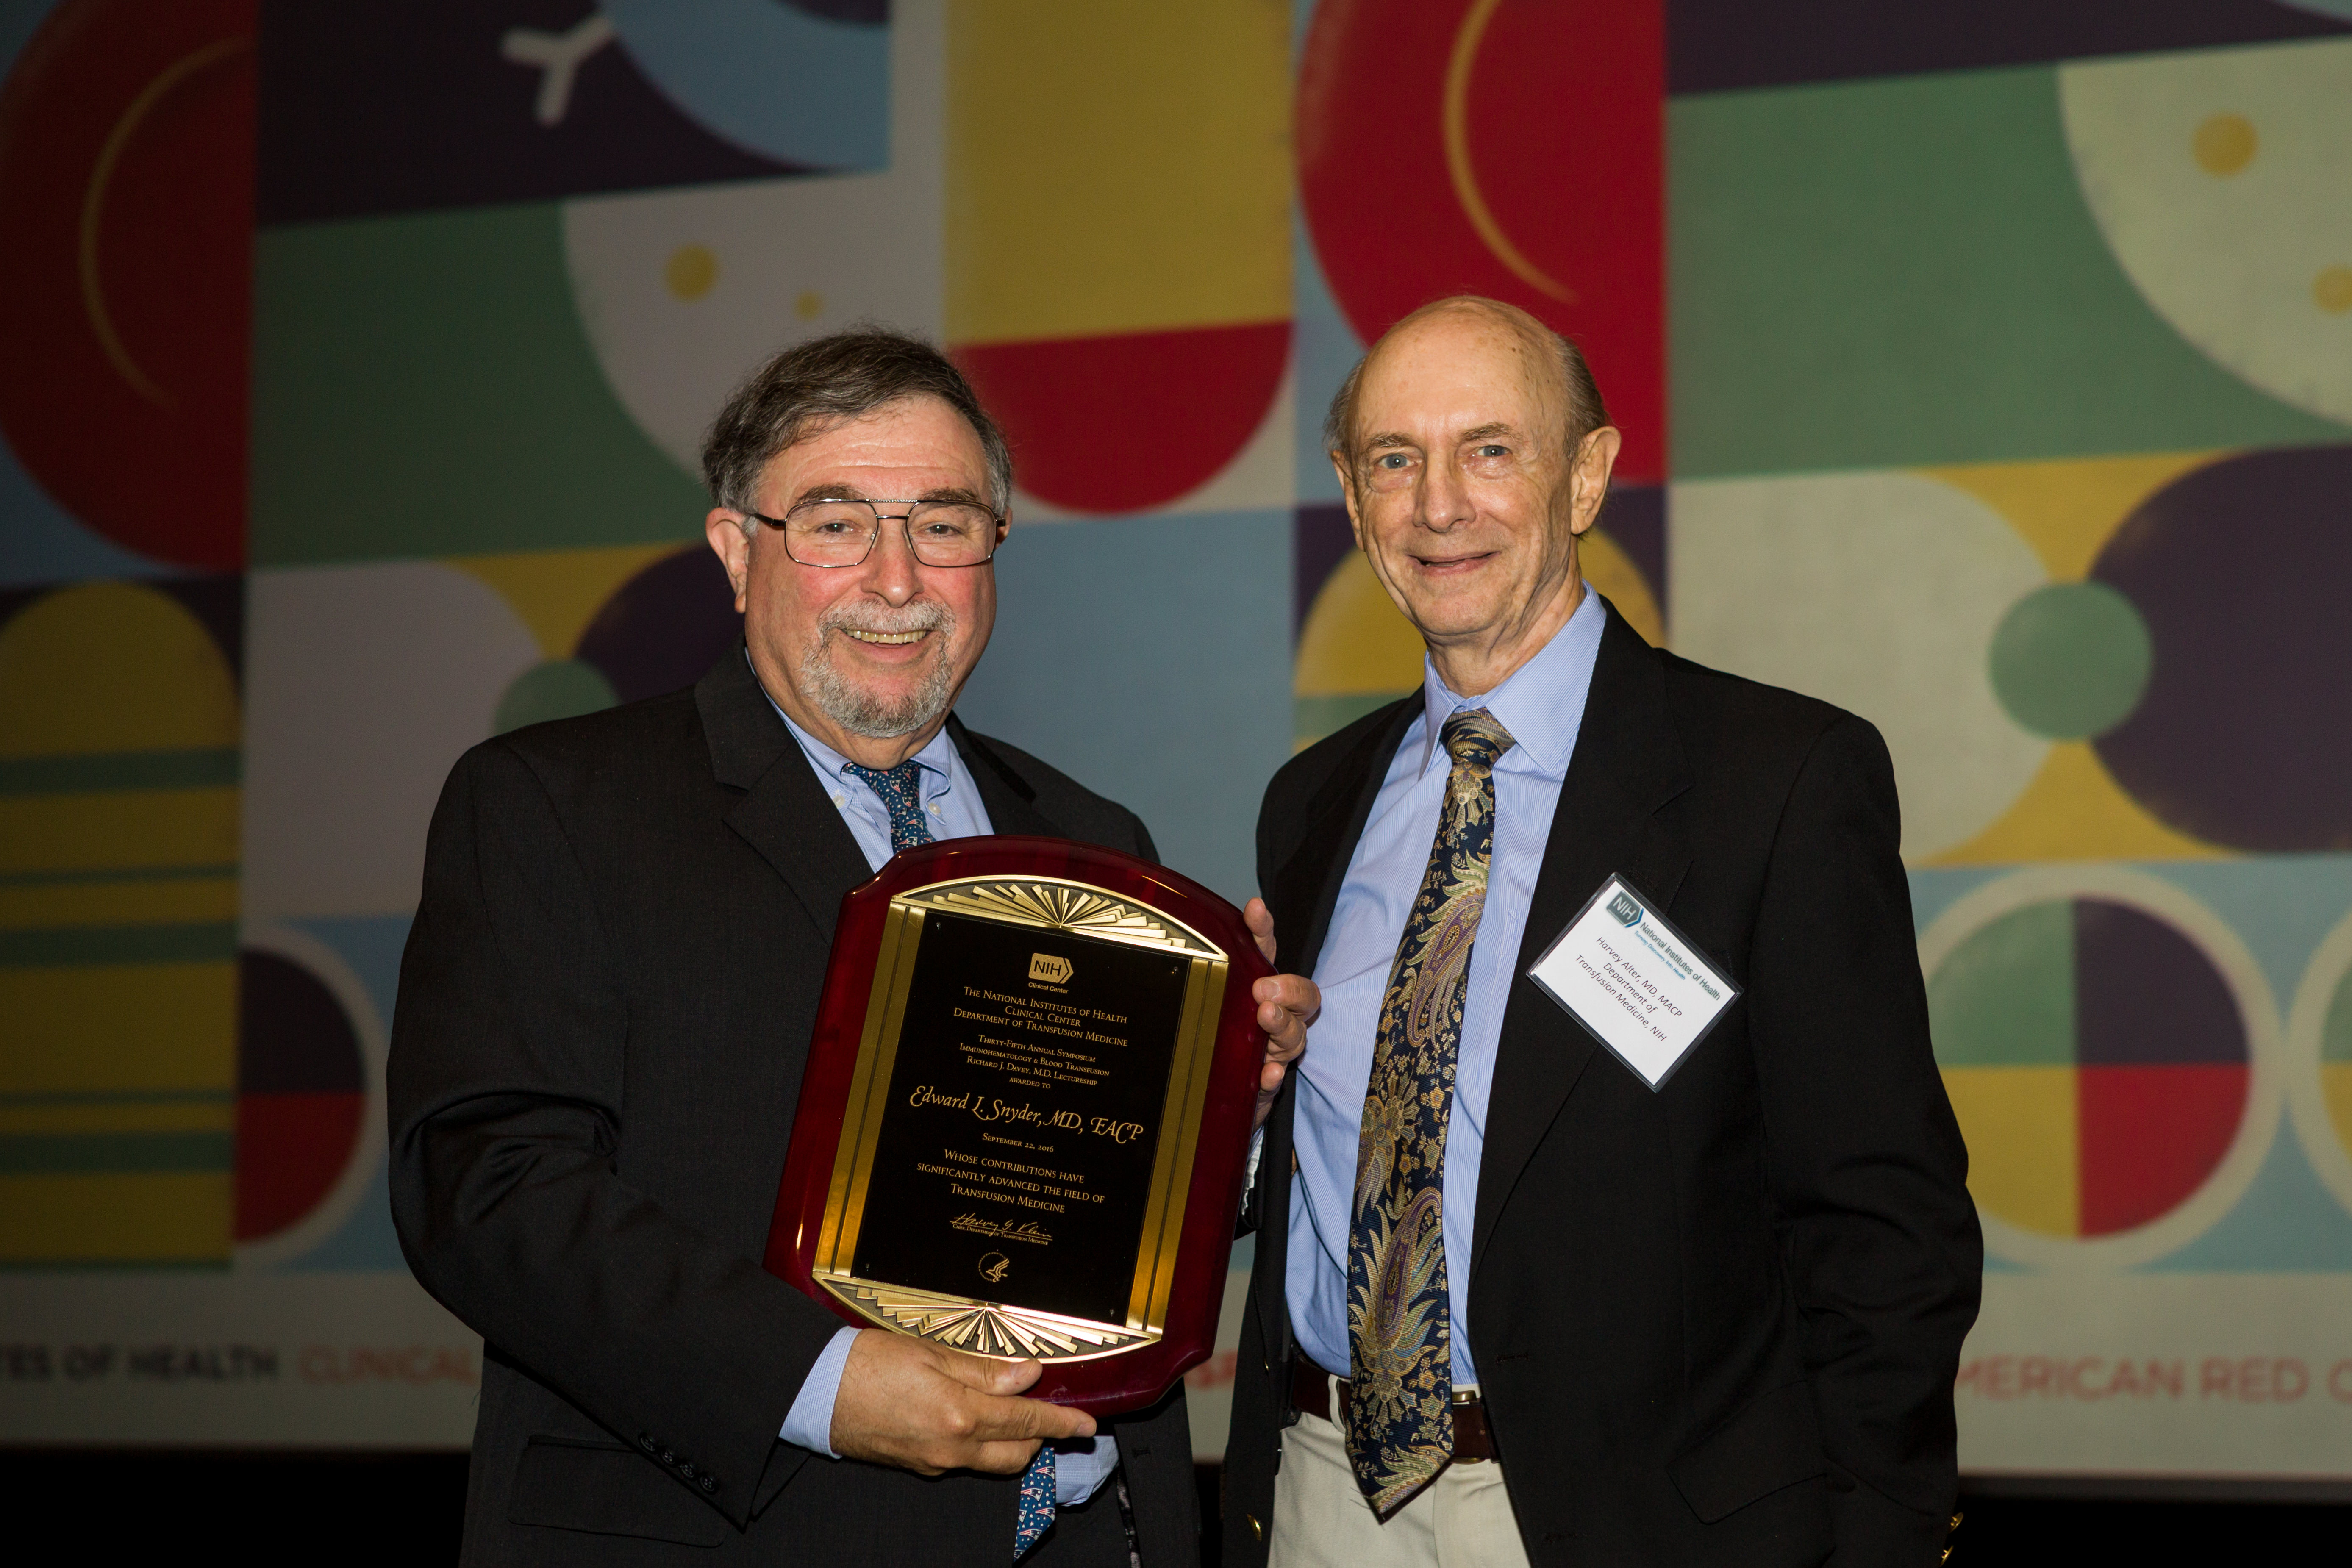 Dr. Harvey J. Alter of the NIH Clinical Center Department of Transfusion Medicine presents the Richard J. Davey Award to Dr. Edward L. Snyder of Yale-New Haven Hospital.